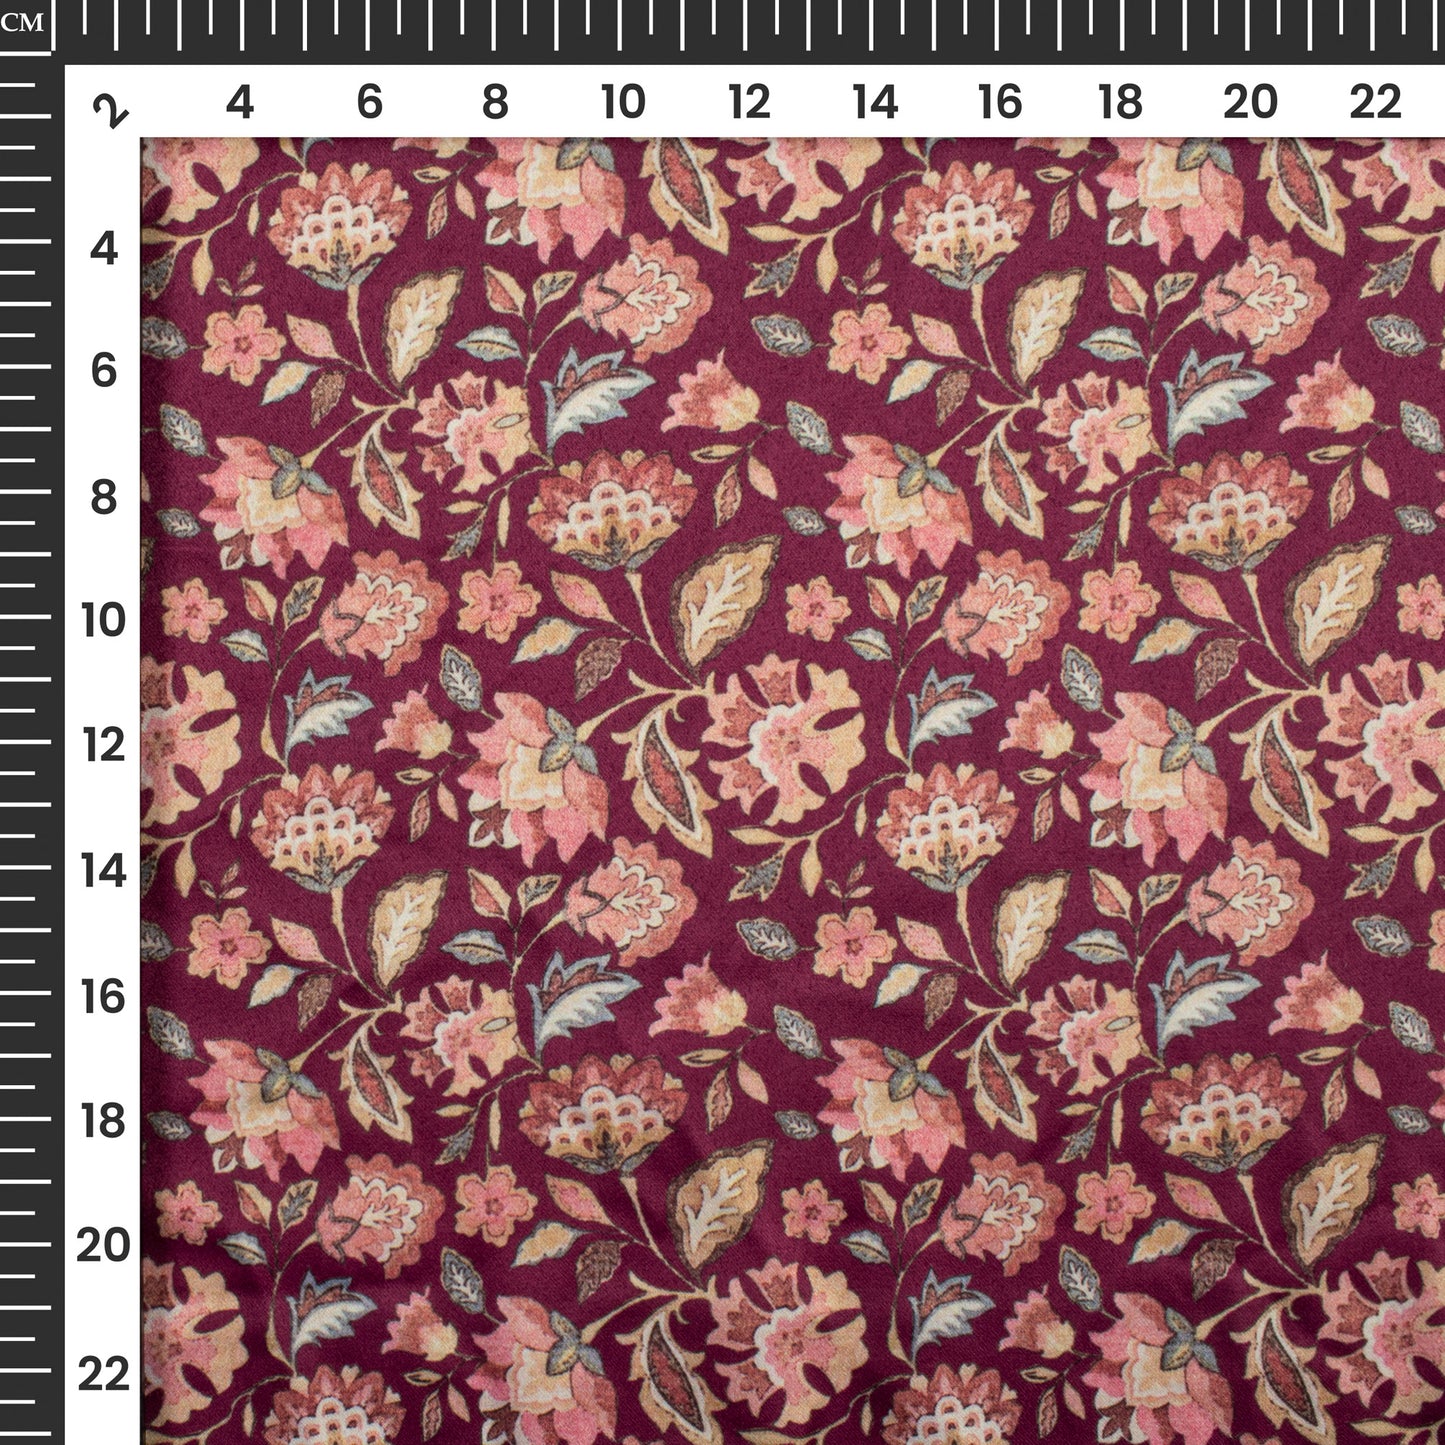 Divine Floral Digital Print Charmeuse Satin Fabric (Width 58 Inches)